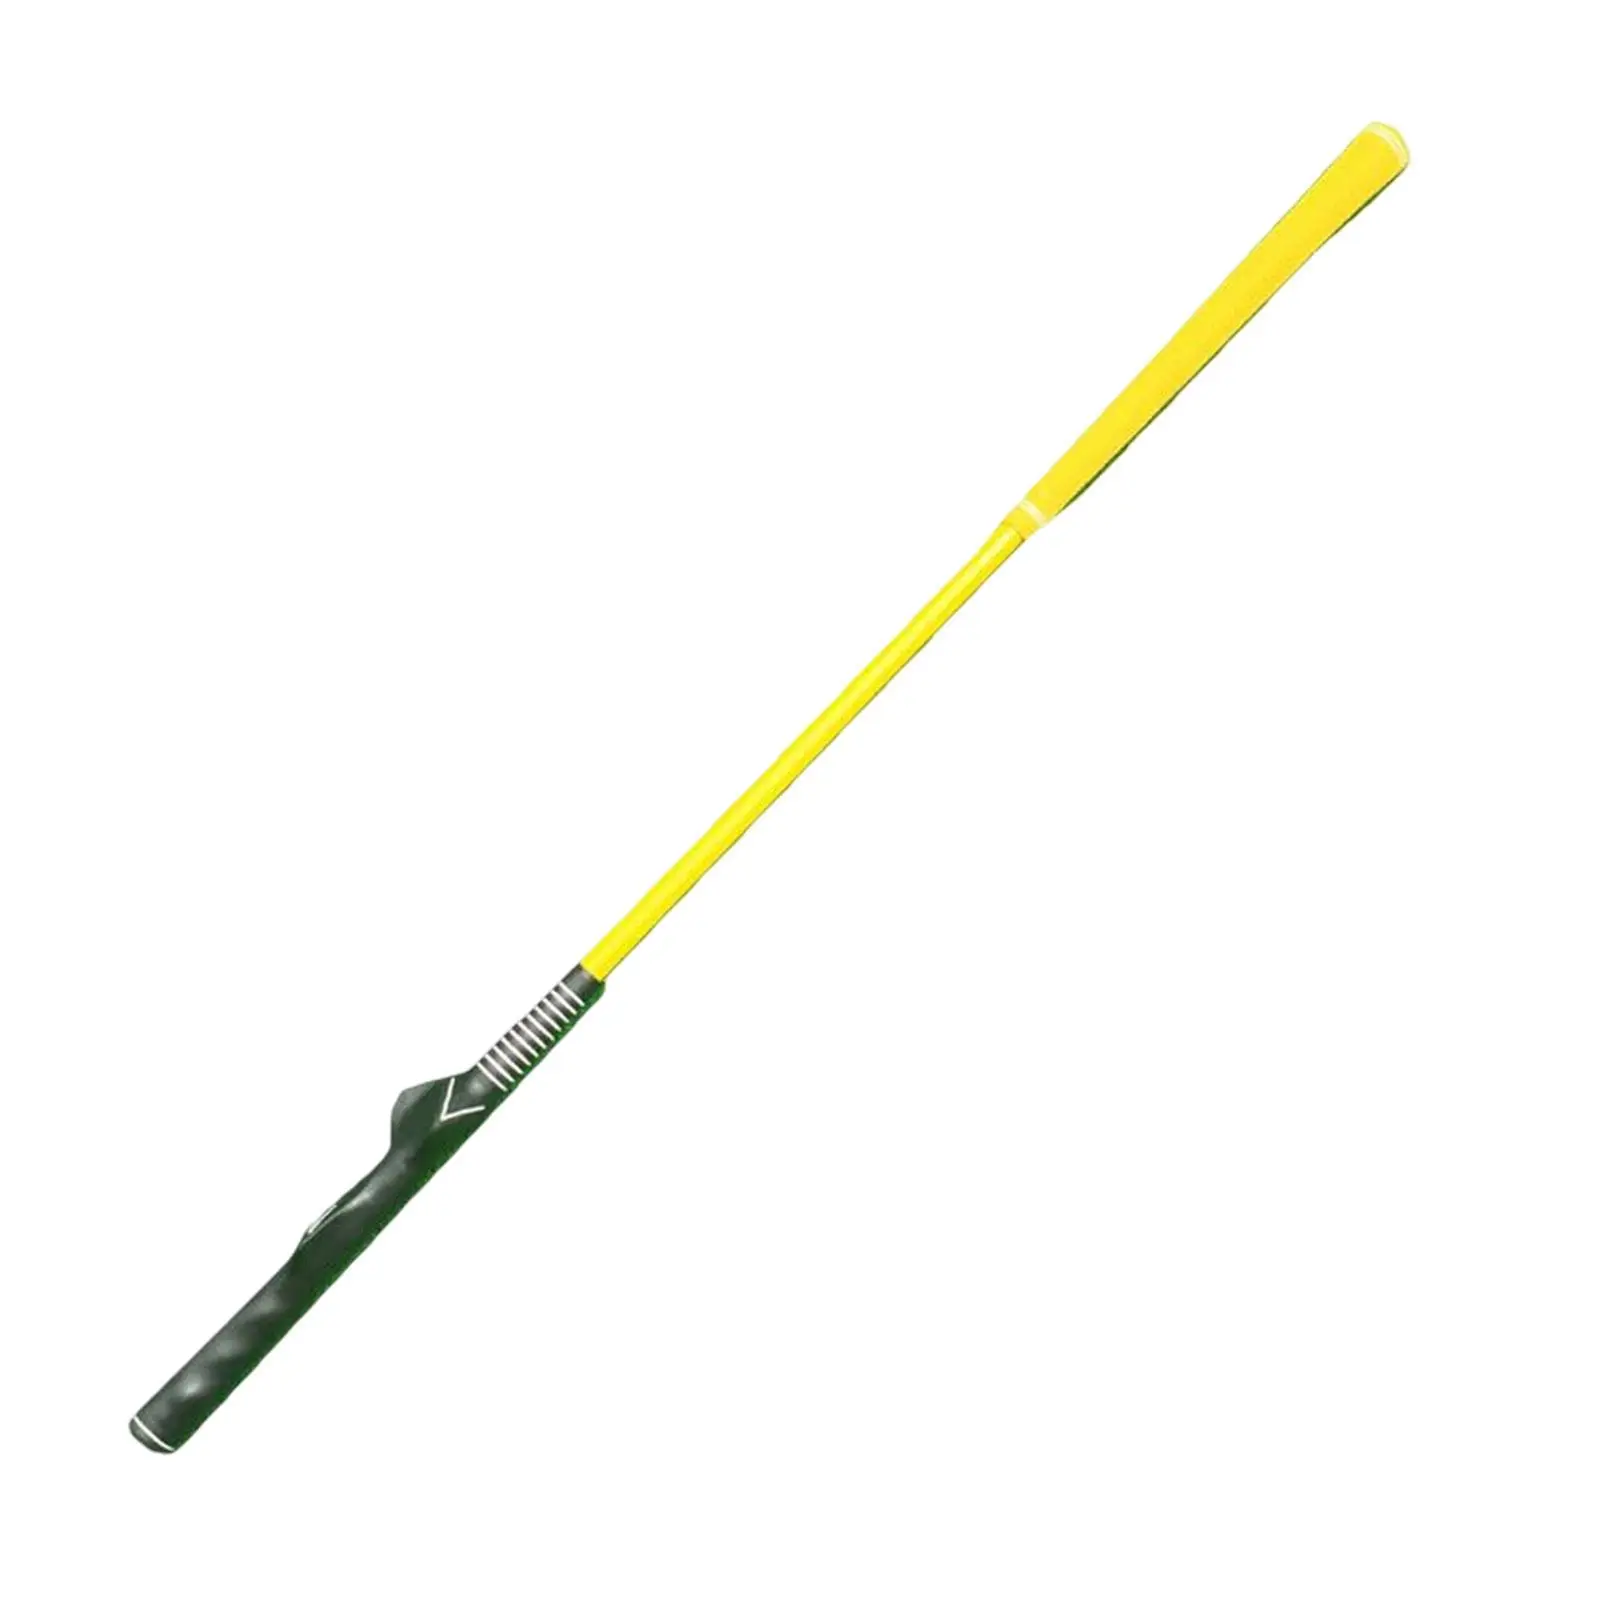 Golf Swing Trainer Aid Warm up Stick Equipment Portable Lightweight Teaching Training Stick for Strength Improved Exercise Speed